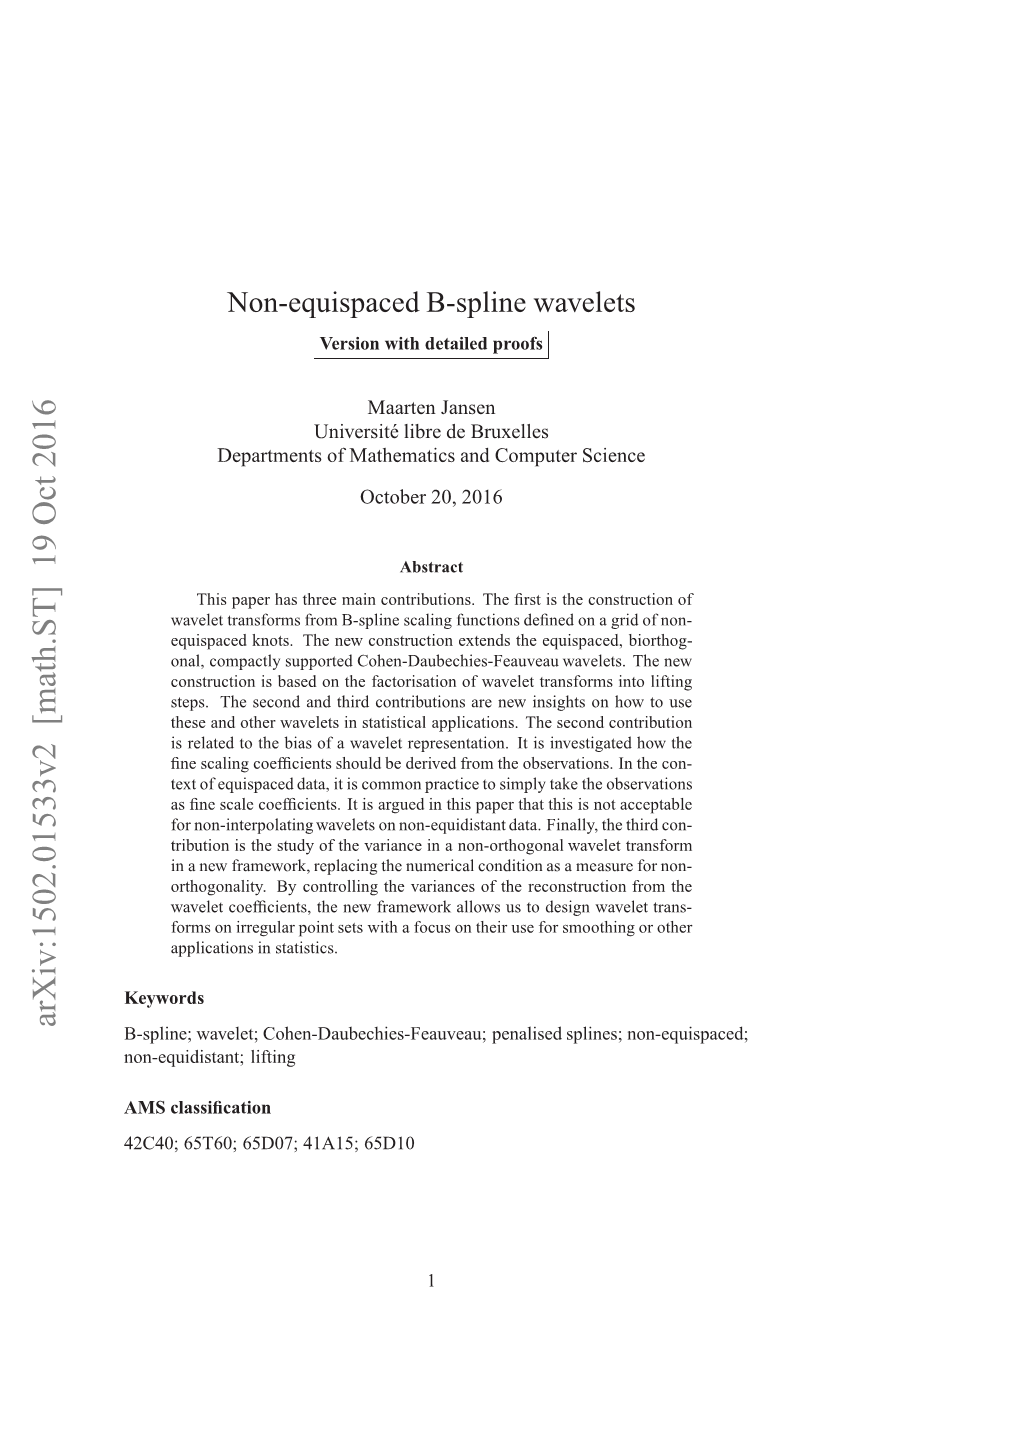 Non-Equispaced B-Spline Wavelets Is Concluded by the Short Section 3.5 on the Non-Decimated B-Spline Wavelet Transform